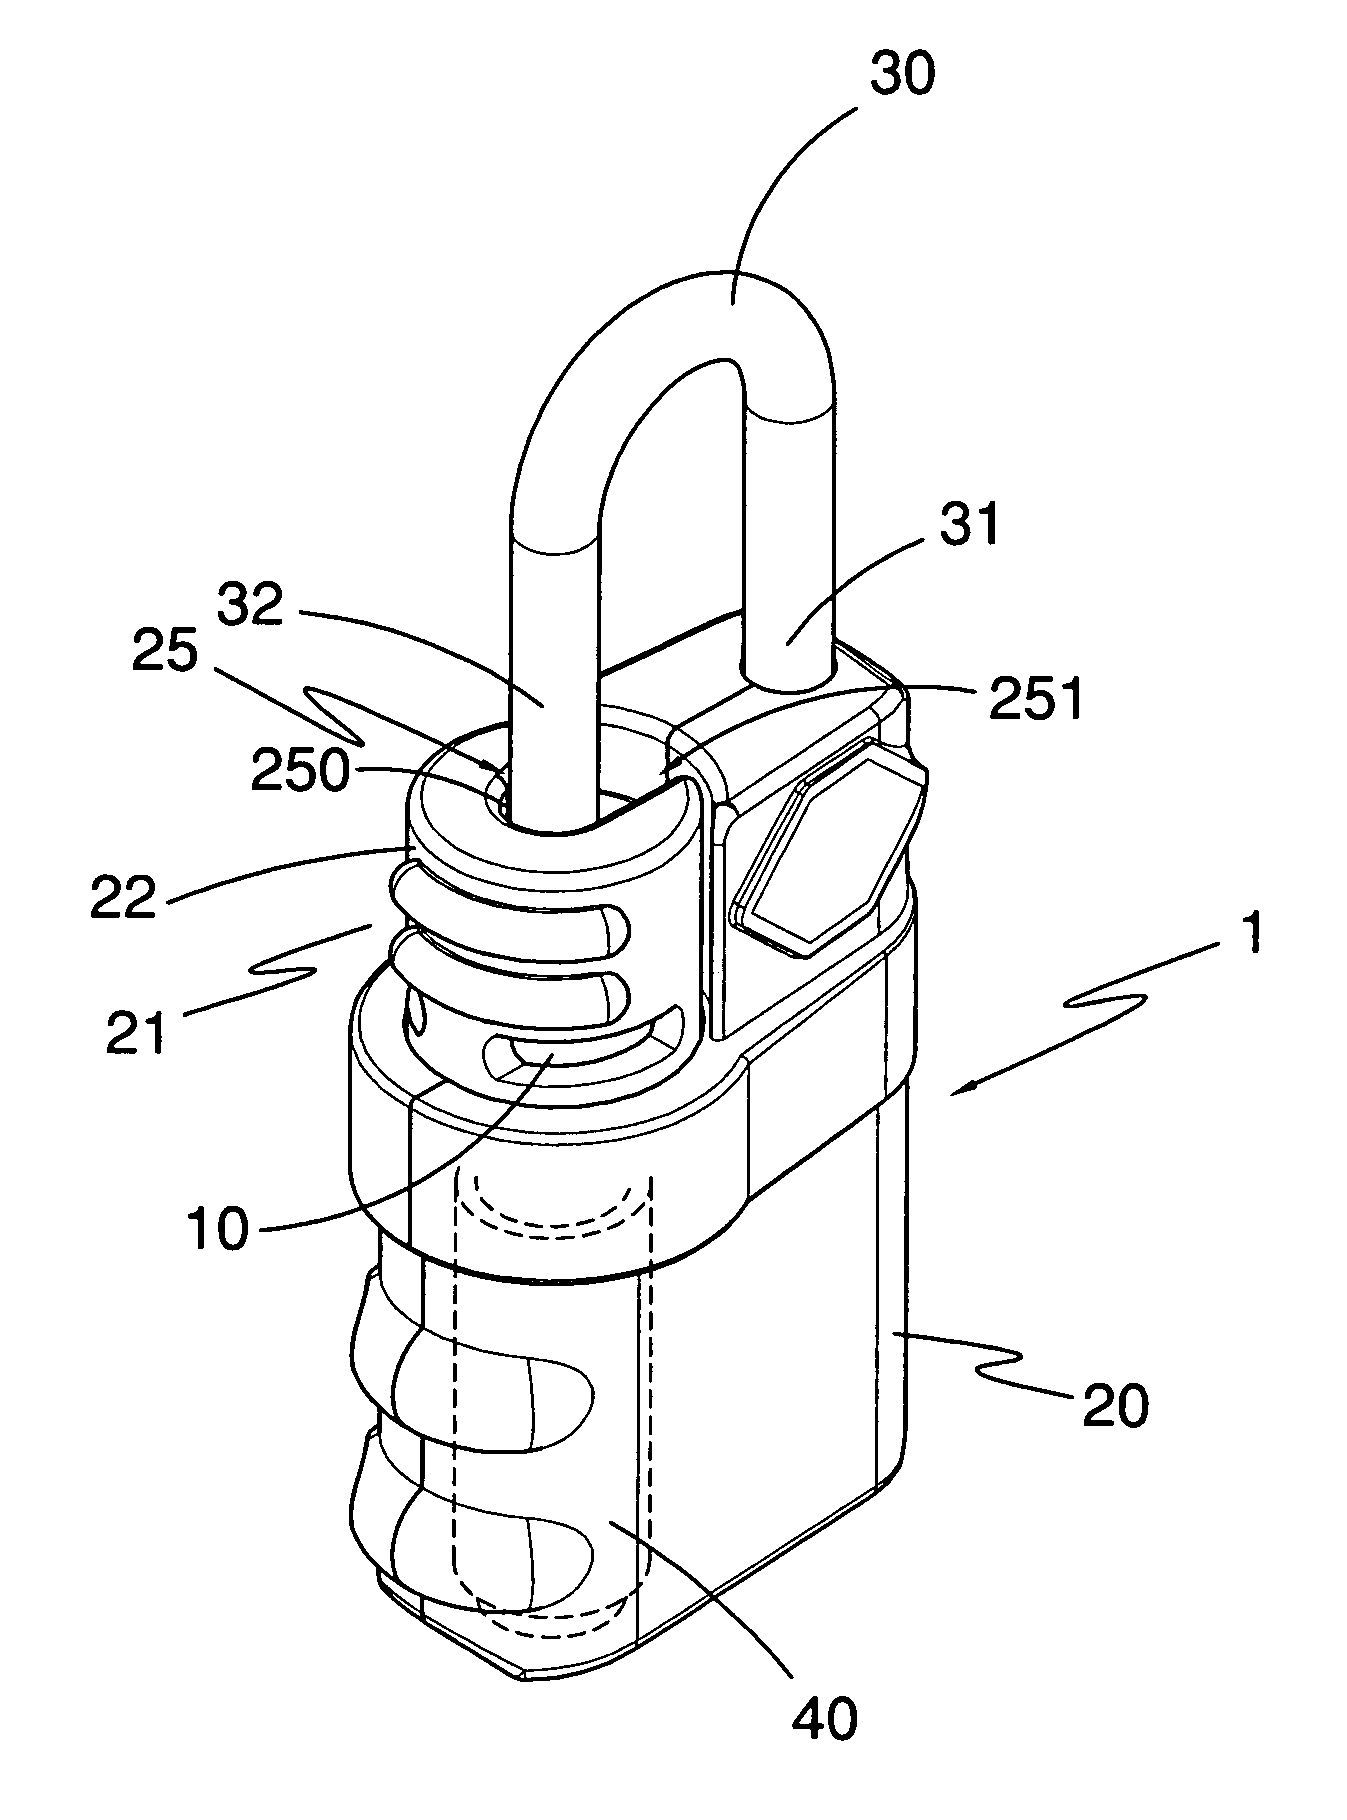 Lock with indicator and multiple key-actuated core